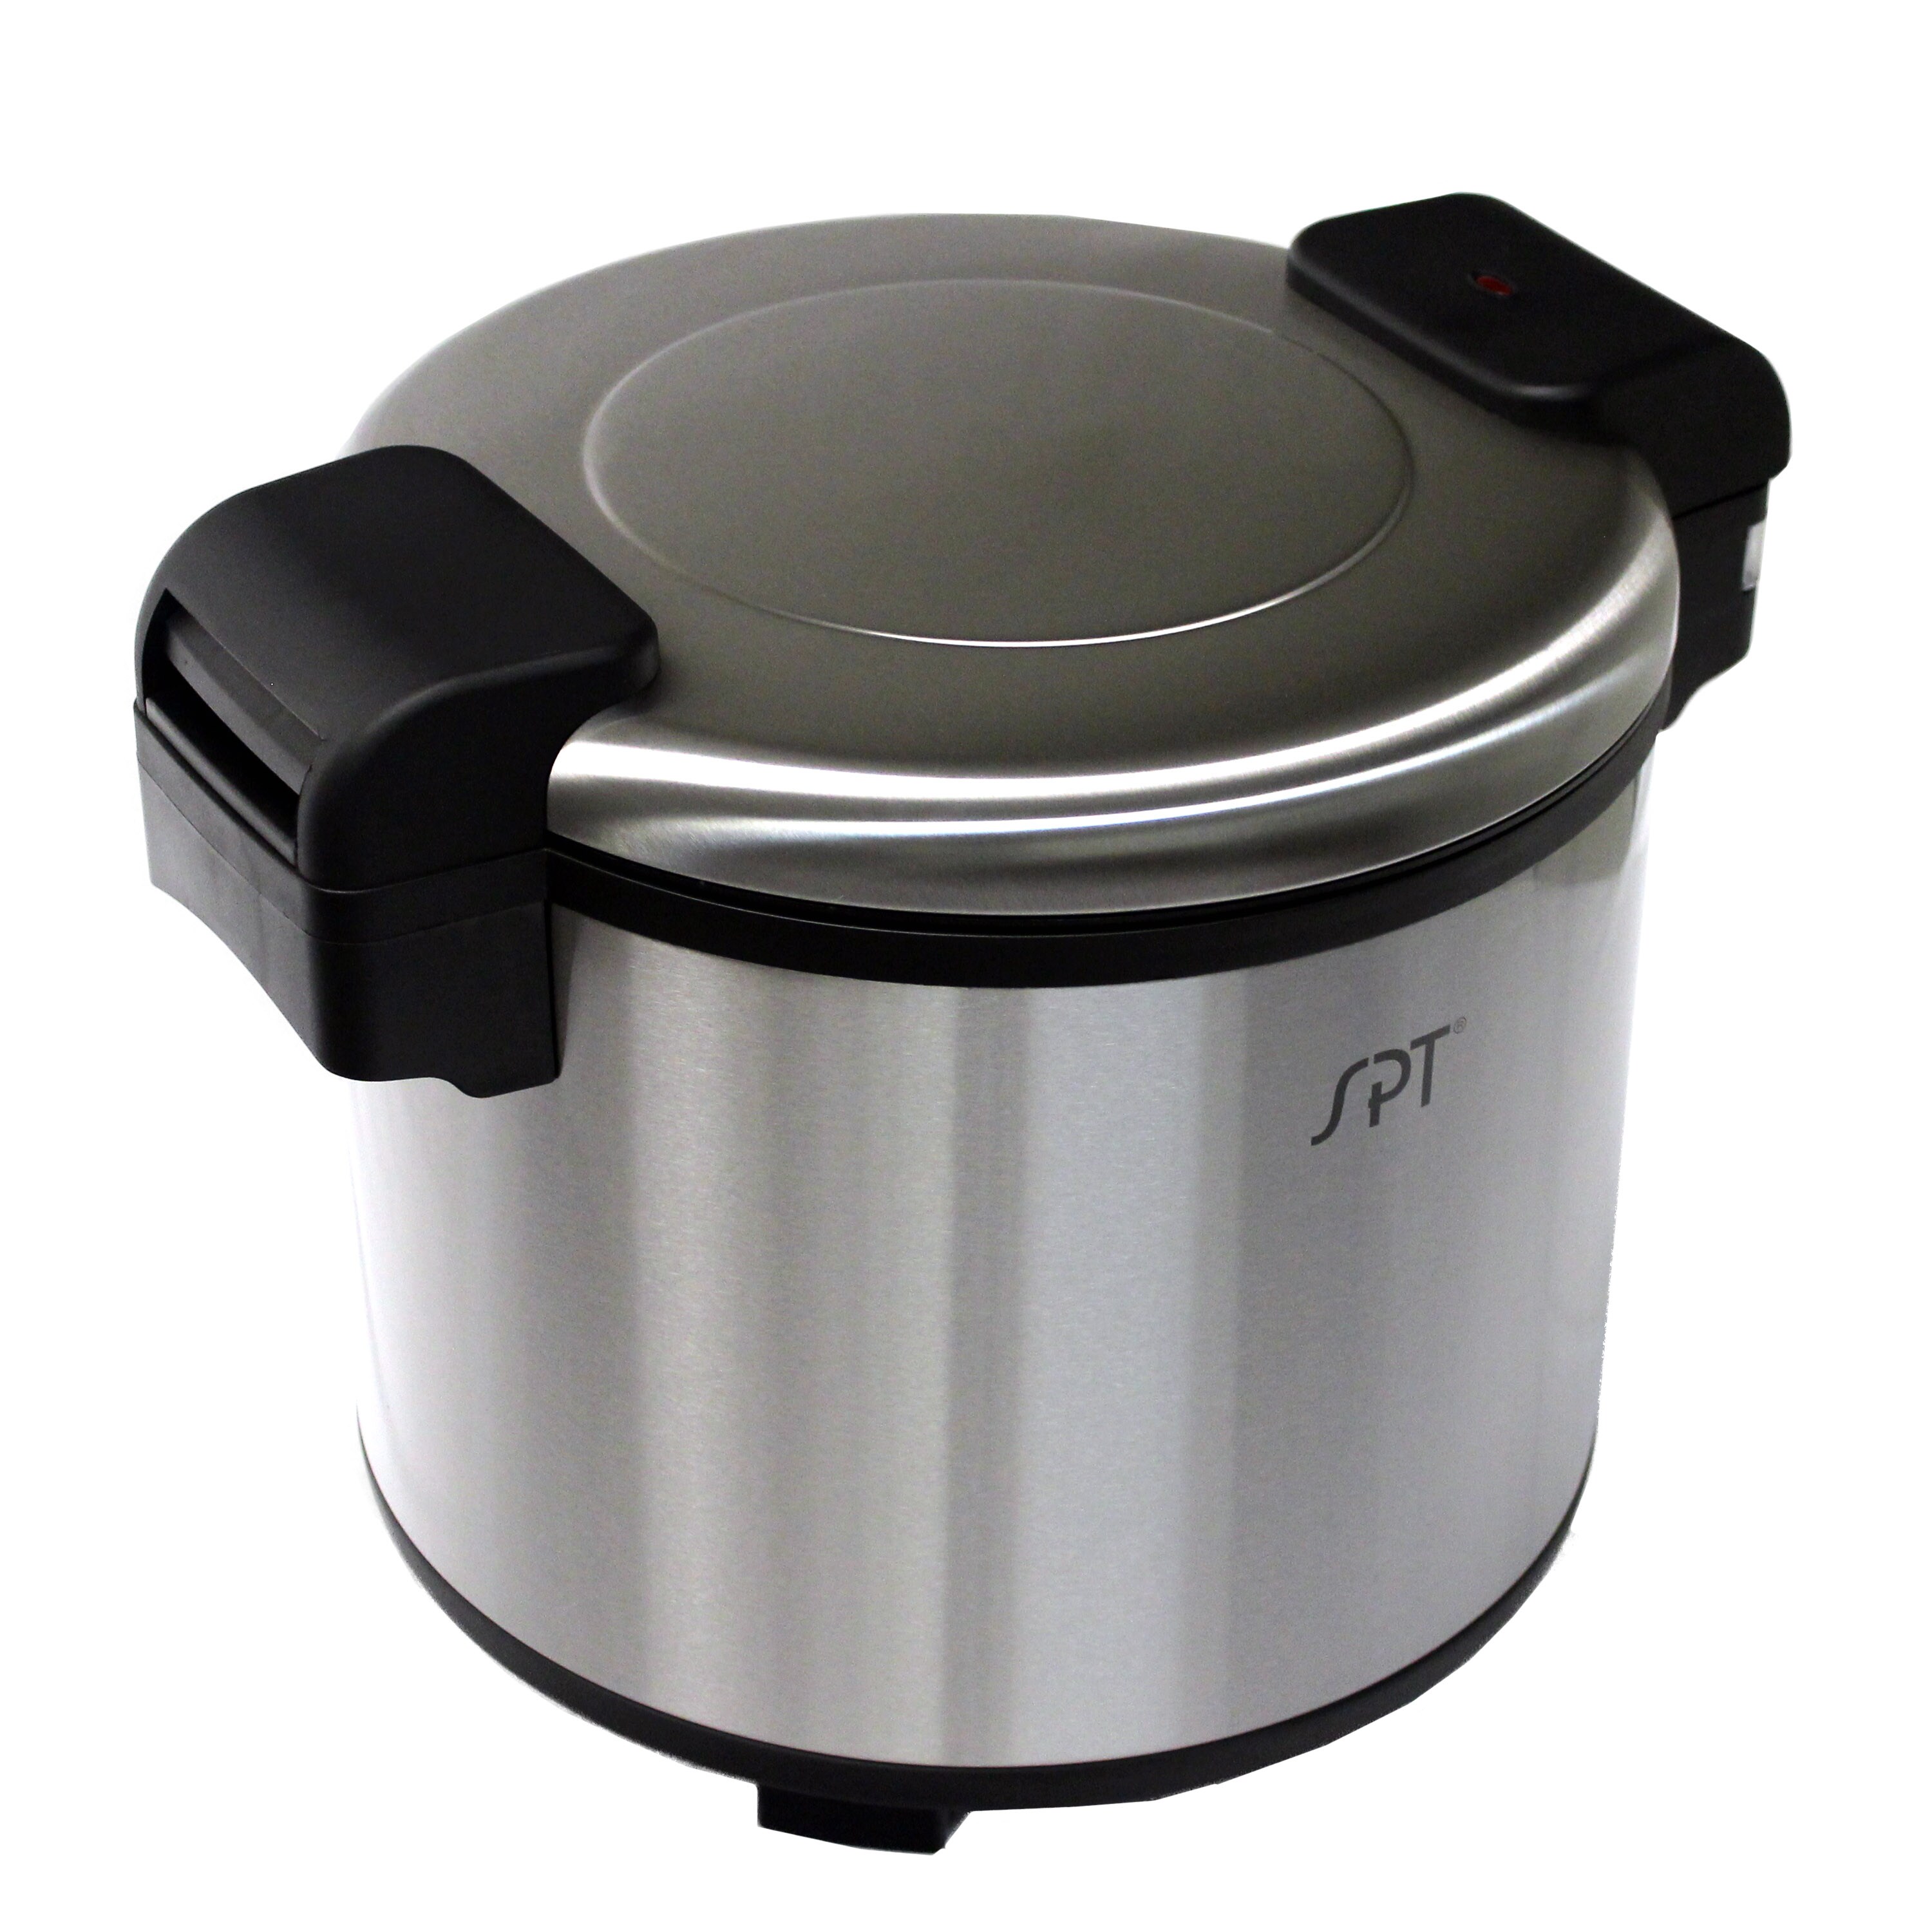 Sunpentown SC-0800S 4 Cup Rice Cooker With Stainless Steel Body 